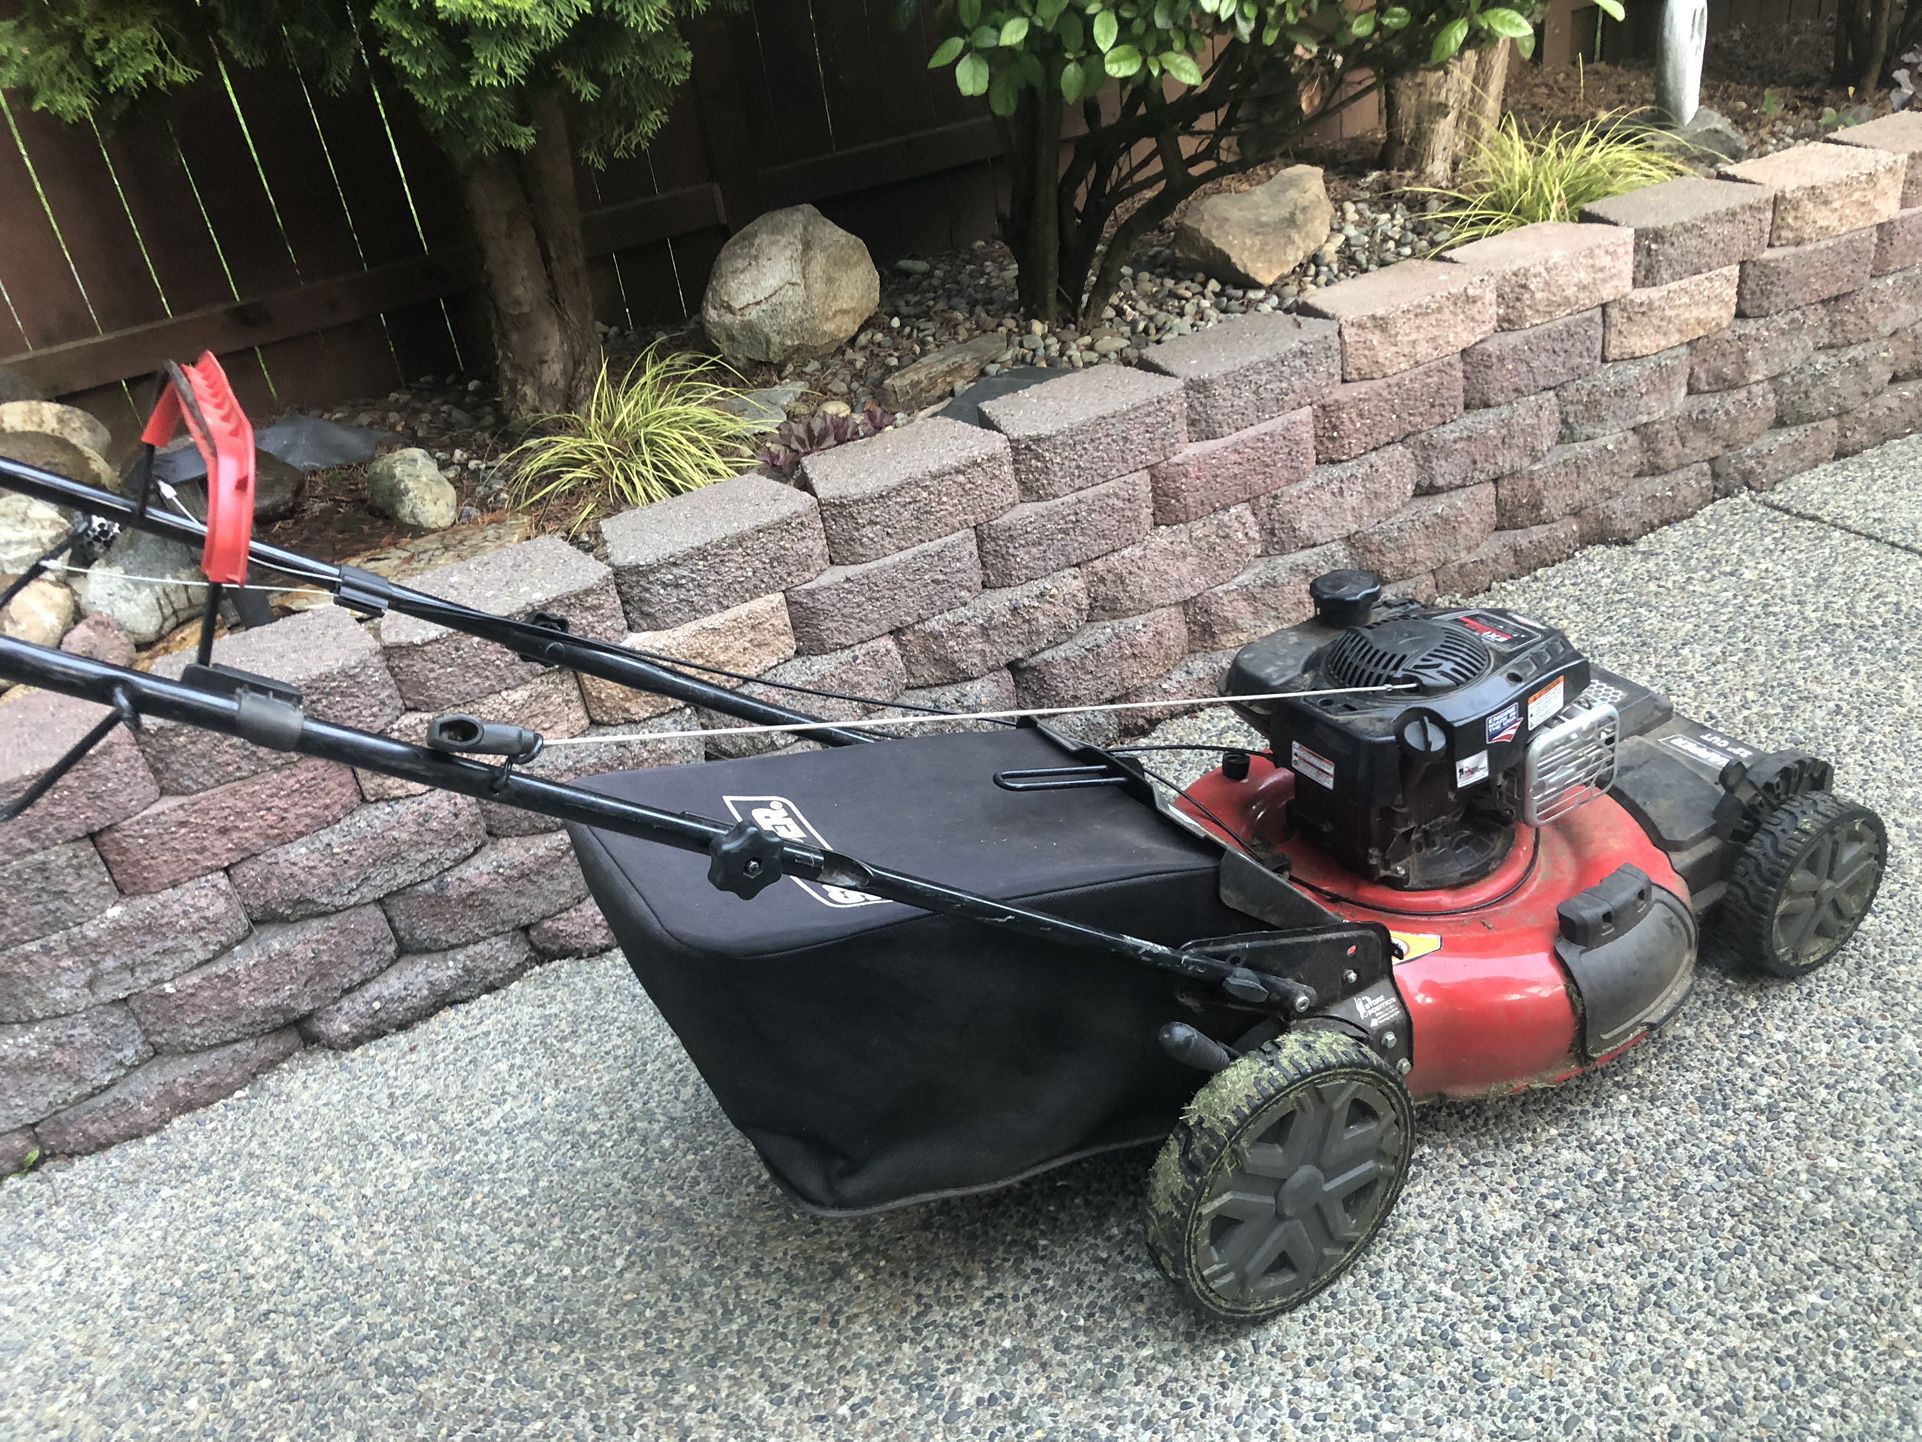 Self Propelled Lawn Mower for sale, Blade spindle broke (see pictures) $50.00 or best Offer. Engine and Self Propelled works great. 